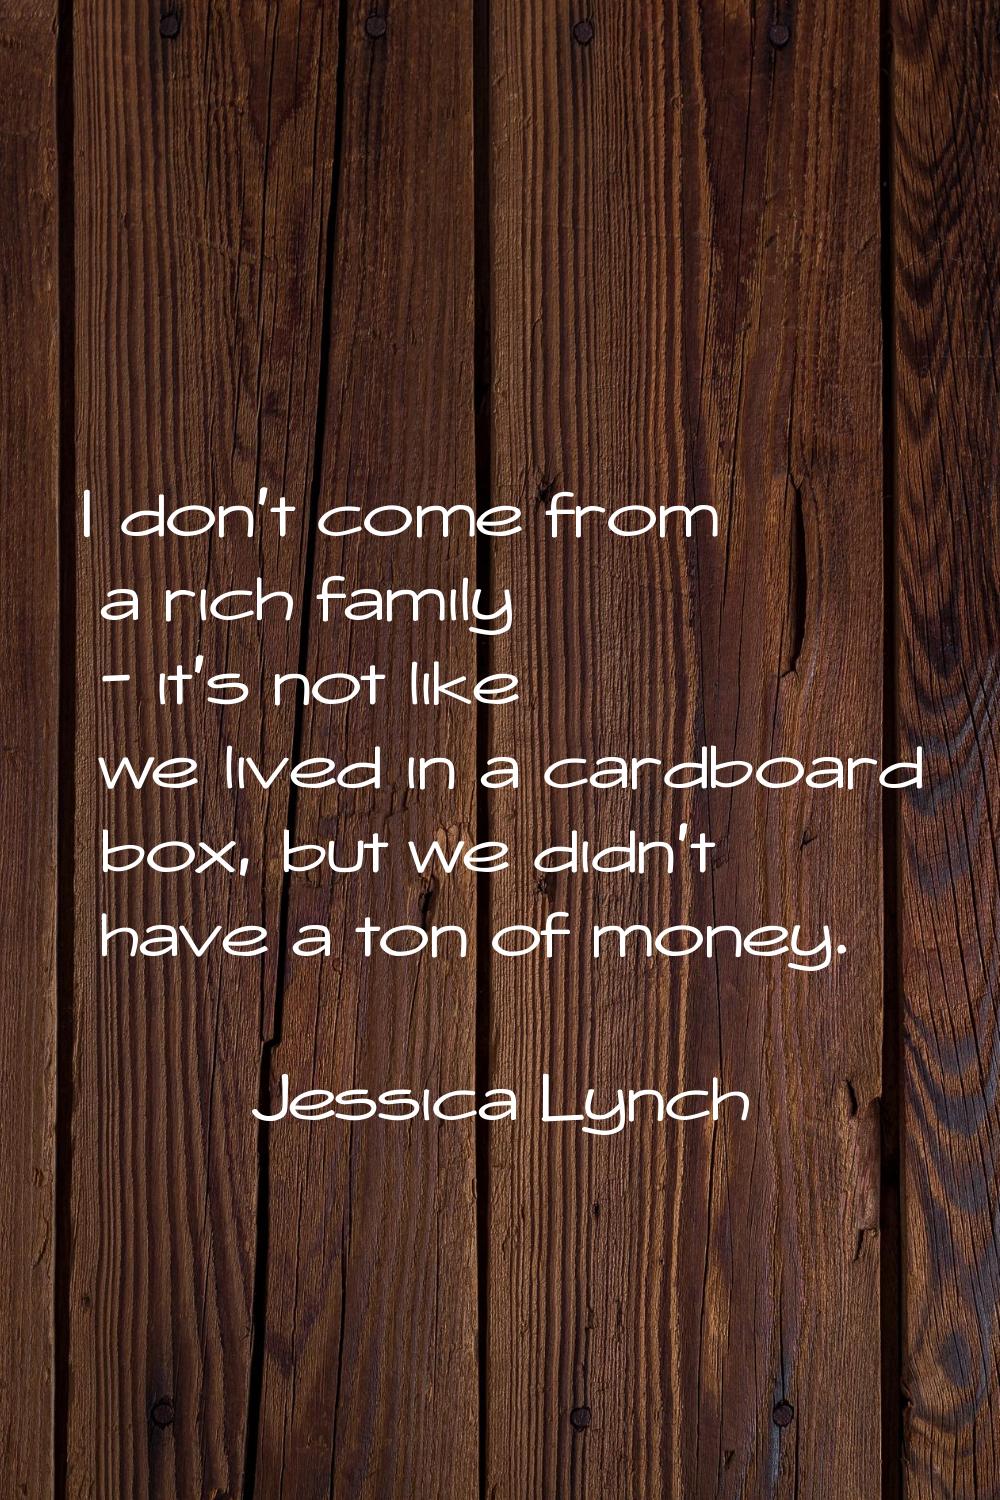 I don't come from a rich family - it's not like we lived in a cardboard box, but we didn't have a t